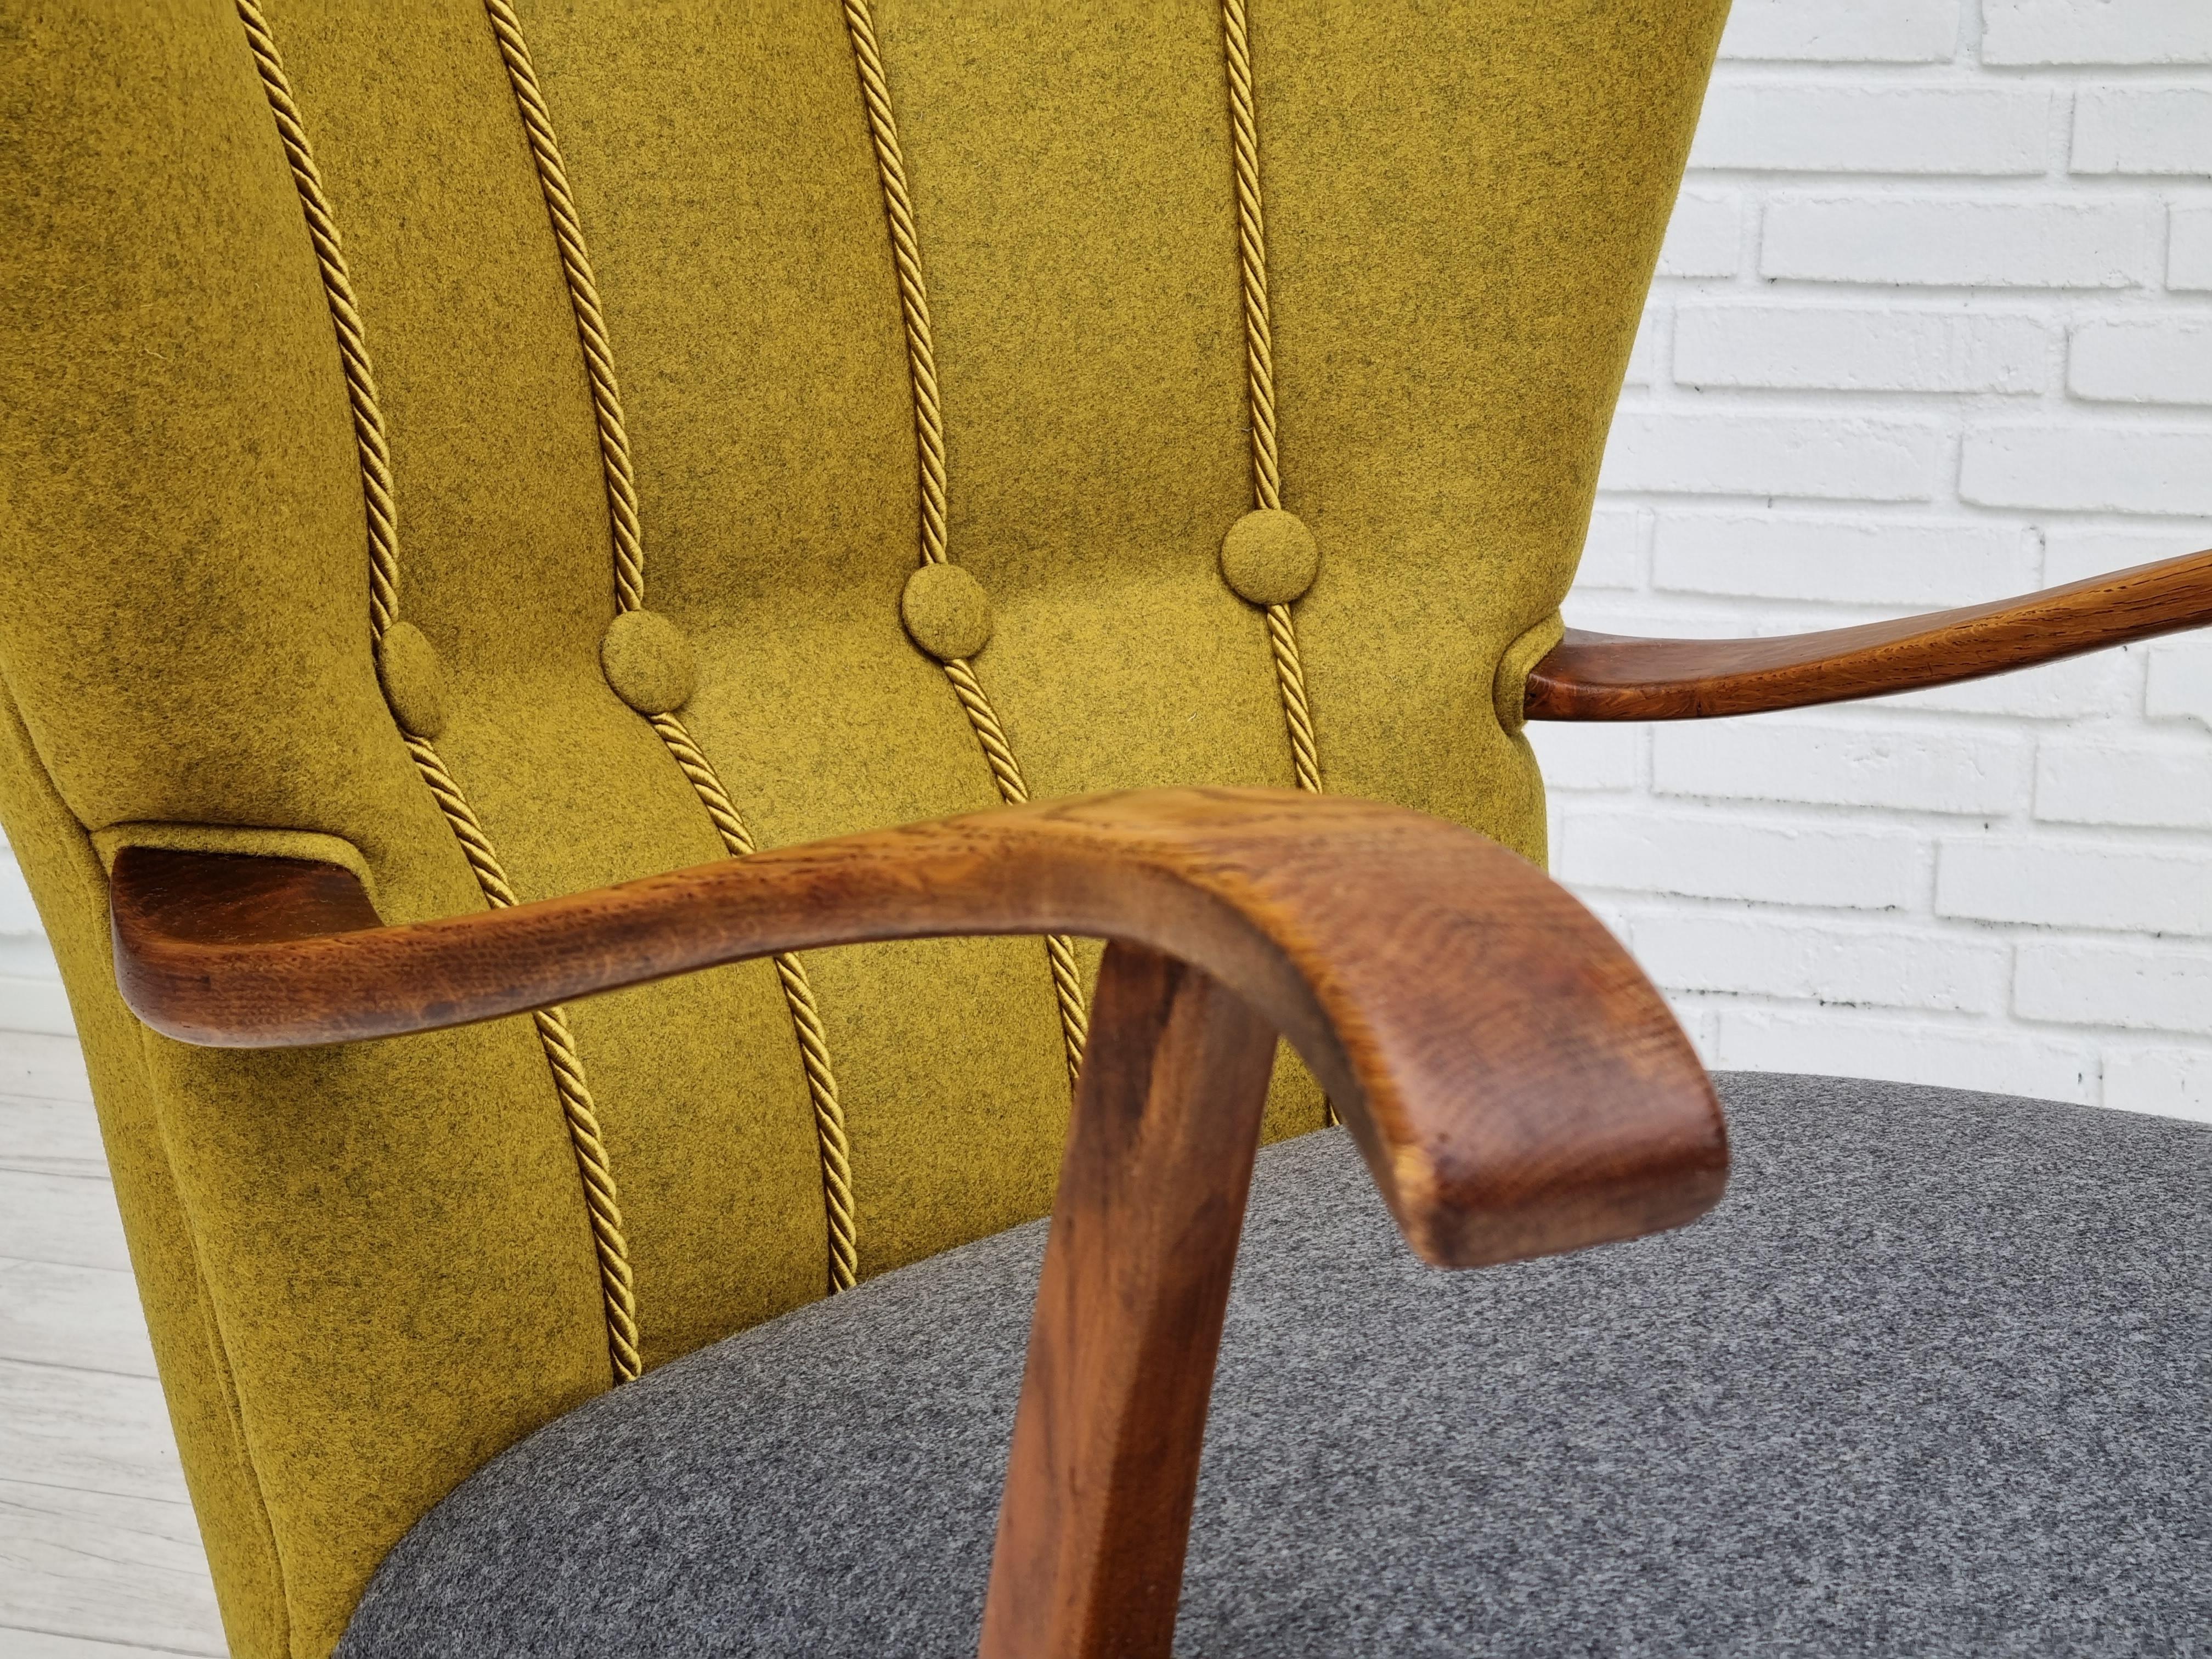 Danish design, 50s. Refurbished, reupholstered relax armchair. Quality felt-like furniture wool fabric in two different colors: carry yellow and gray. Color combination right after original design from 1955-60. Legs and armrests of oak wood.